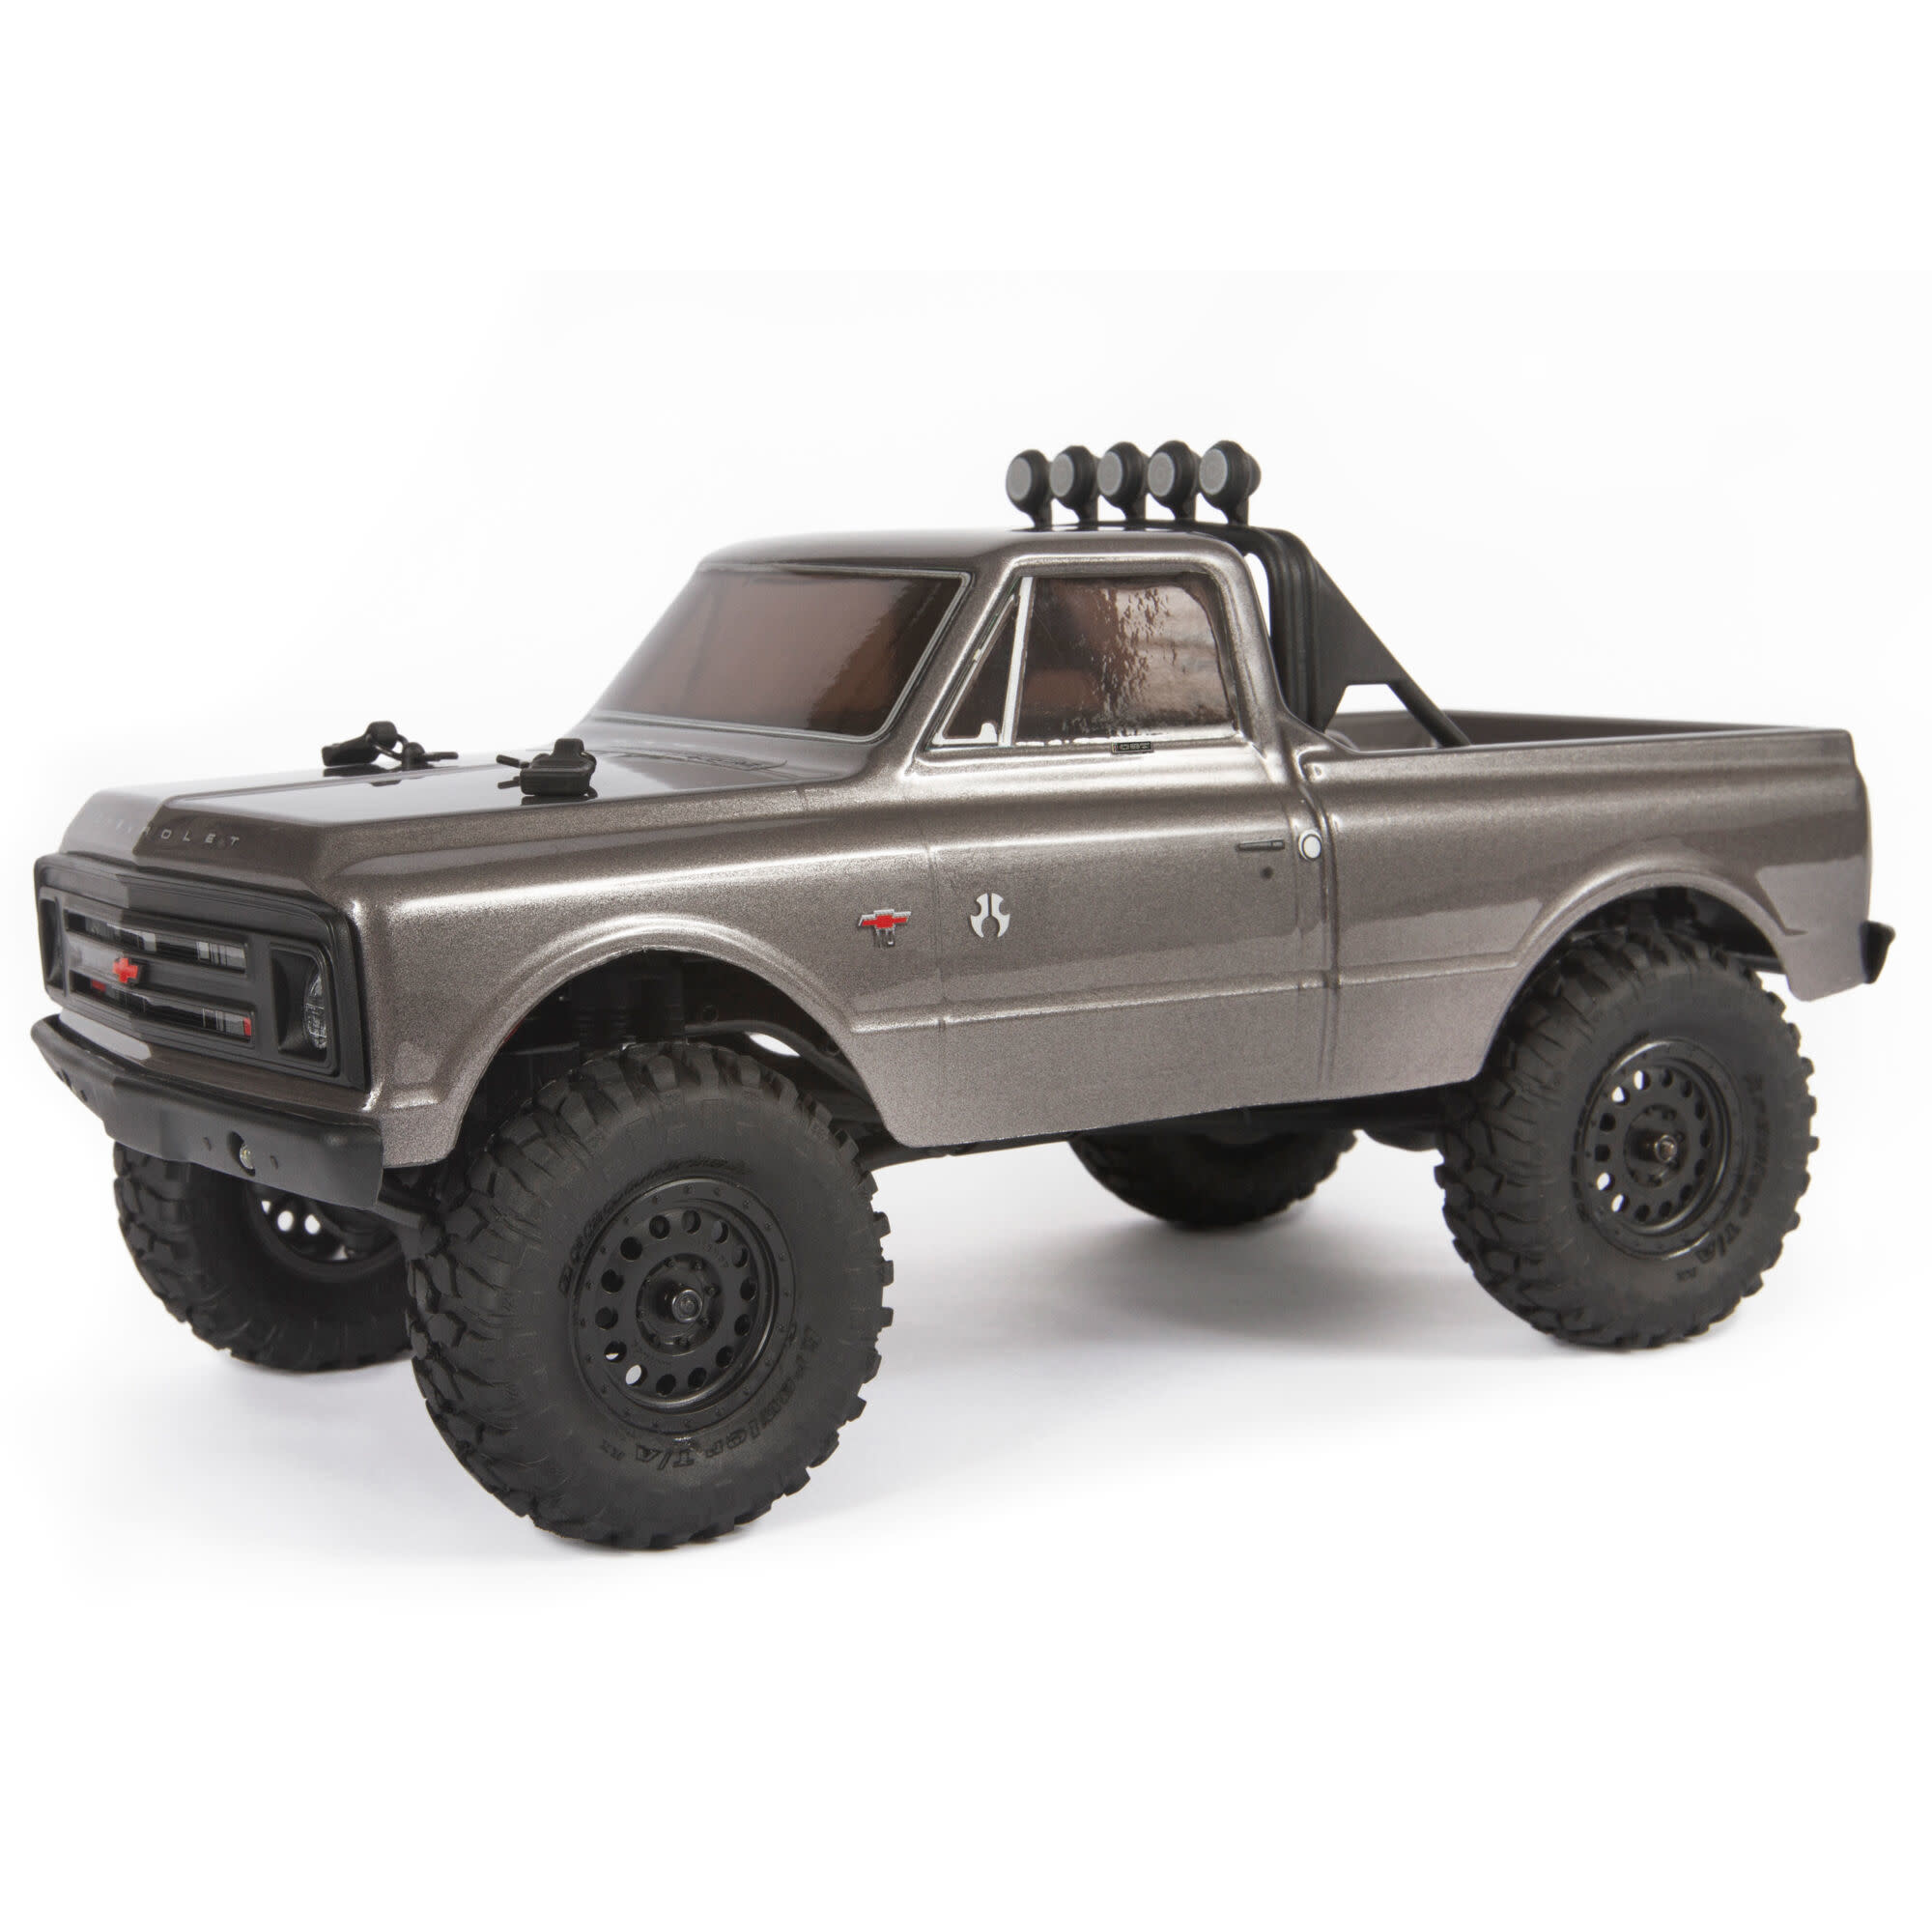 Axial SCX24 1967 Chevrolet C10 1/24 4WD RTR Dark Silver RC Crawler Brushed Electric